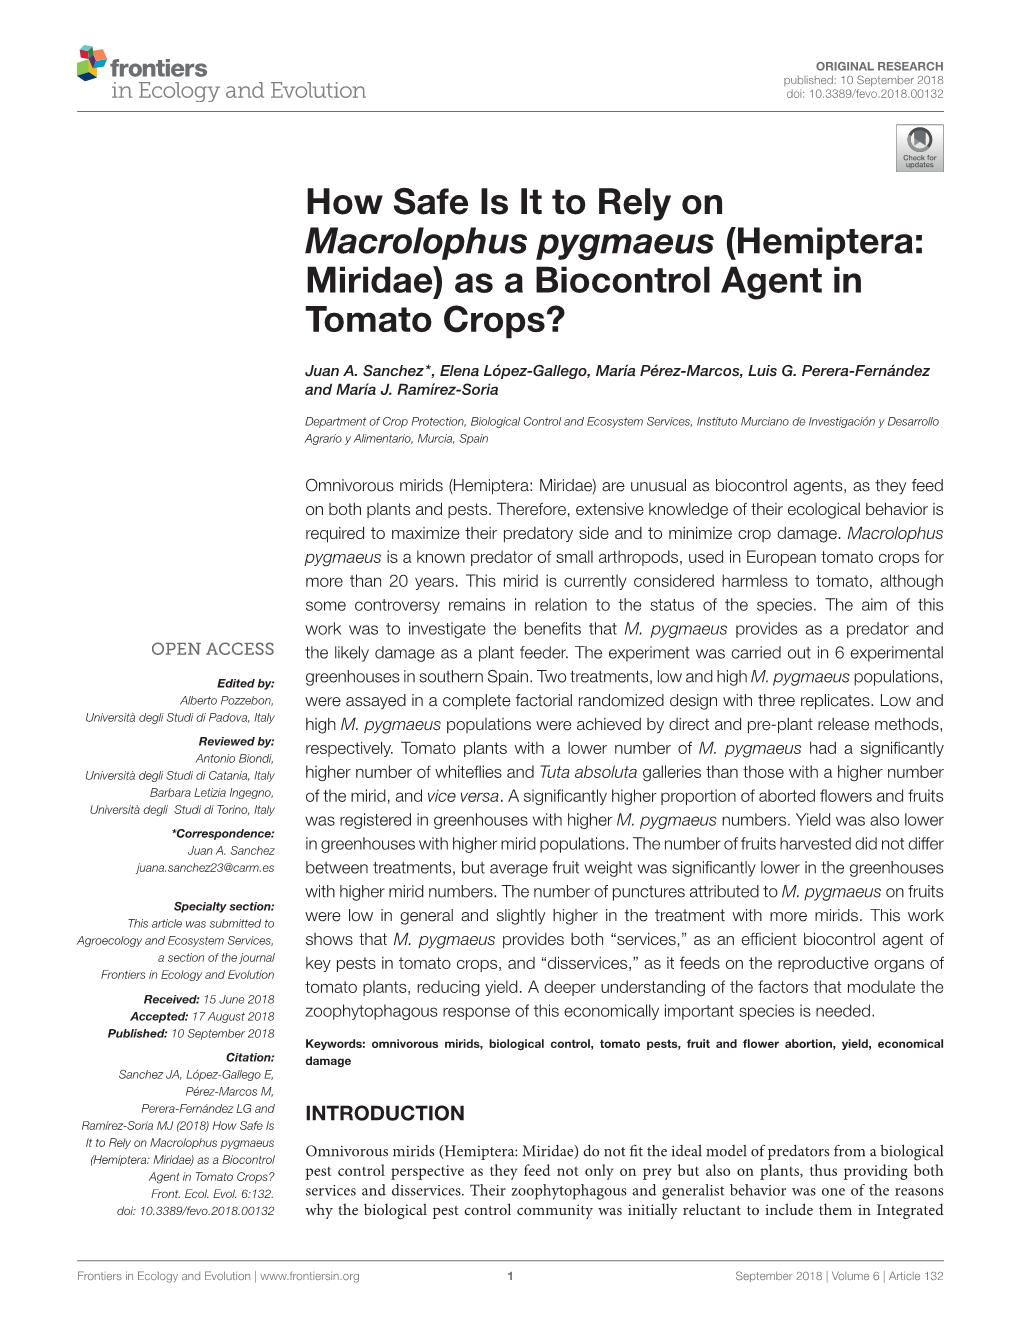 How Safe Is It to Rely on Macrolophus Pygmaeus (Hemiptera: Miridae) As a Biocontrol Agent in Tomato Crops?